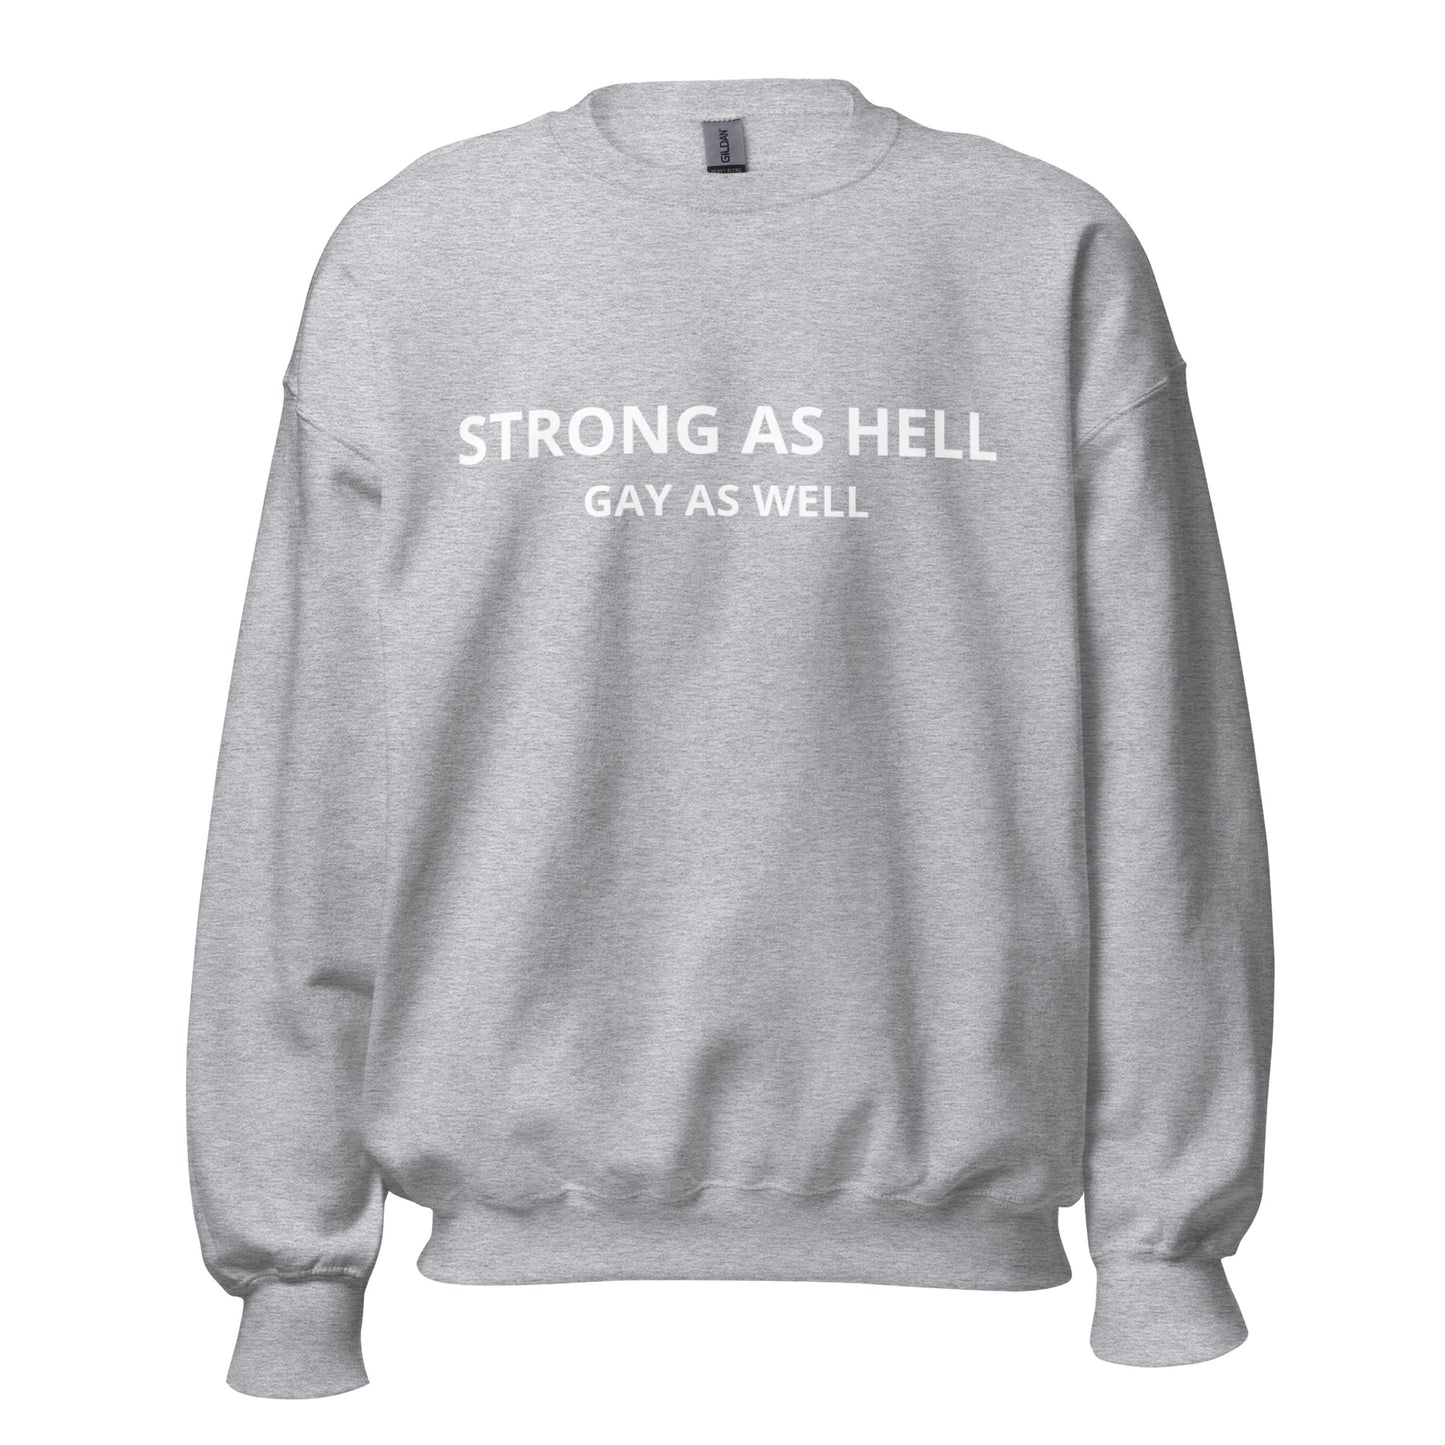 STRONG AS HELL